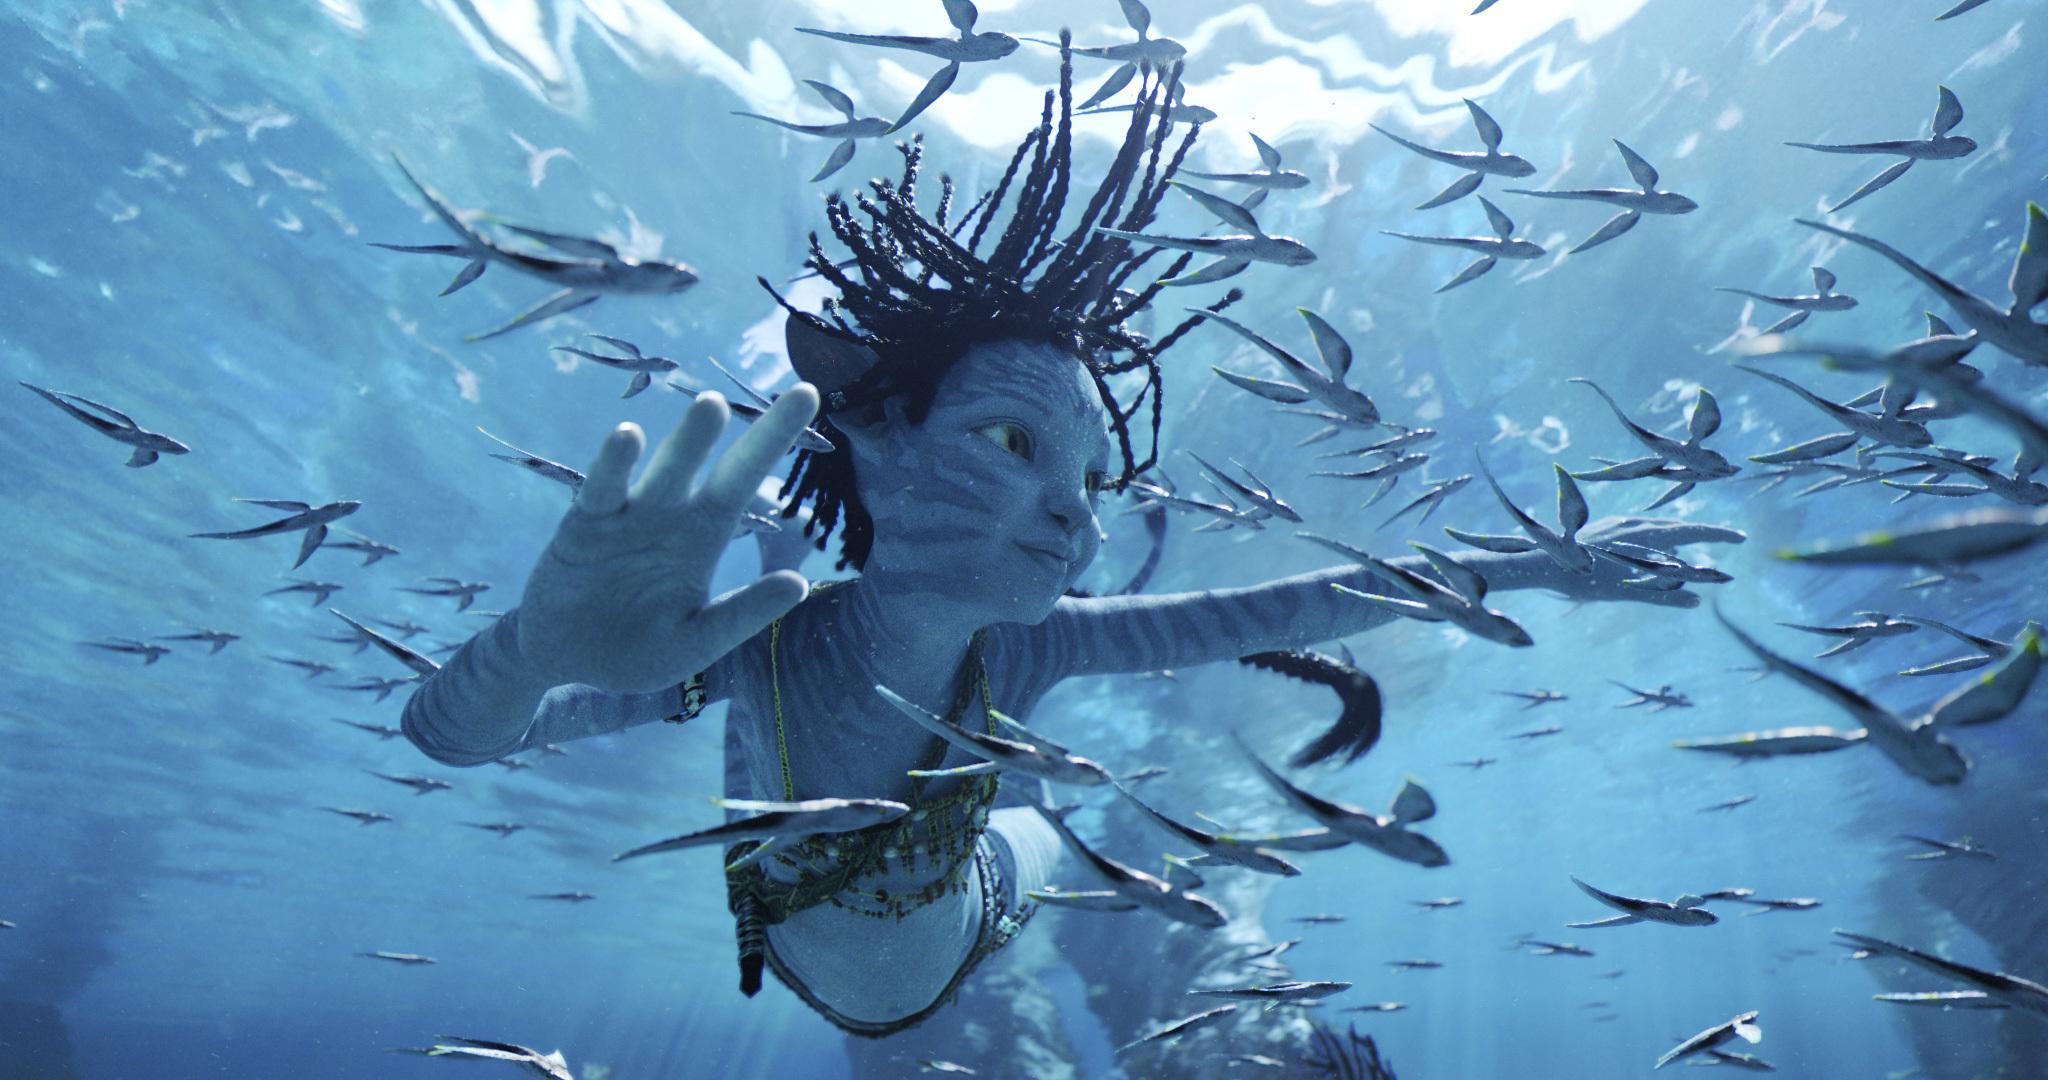 Sigourney Weaver as Kiri in Avatar The Way of Water. She is swimming with fish in the sea.